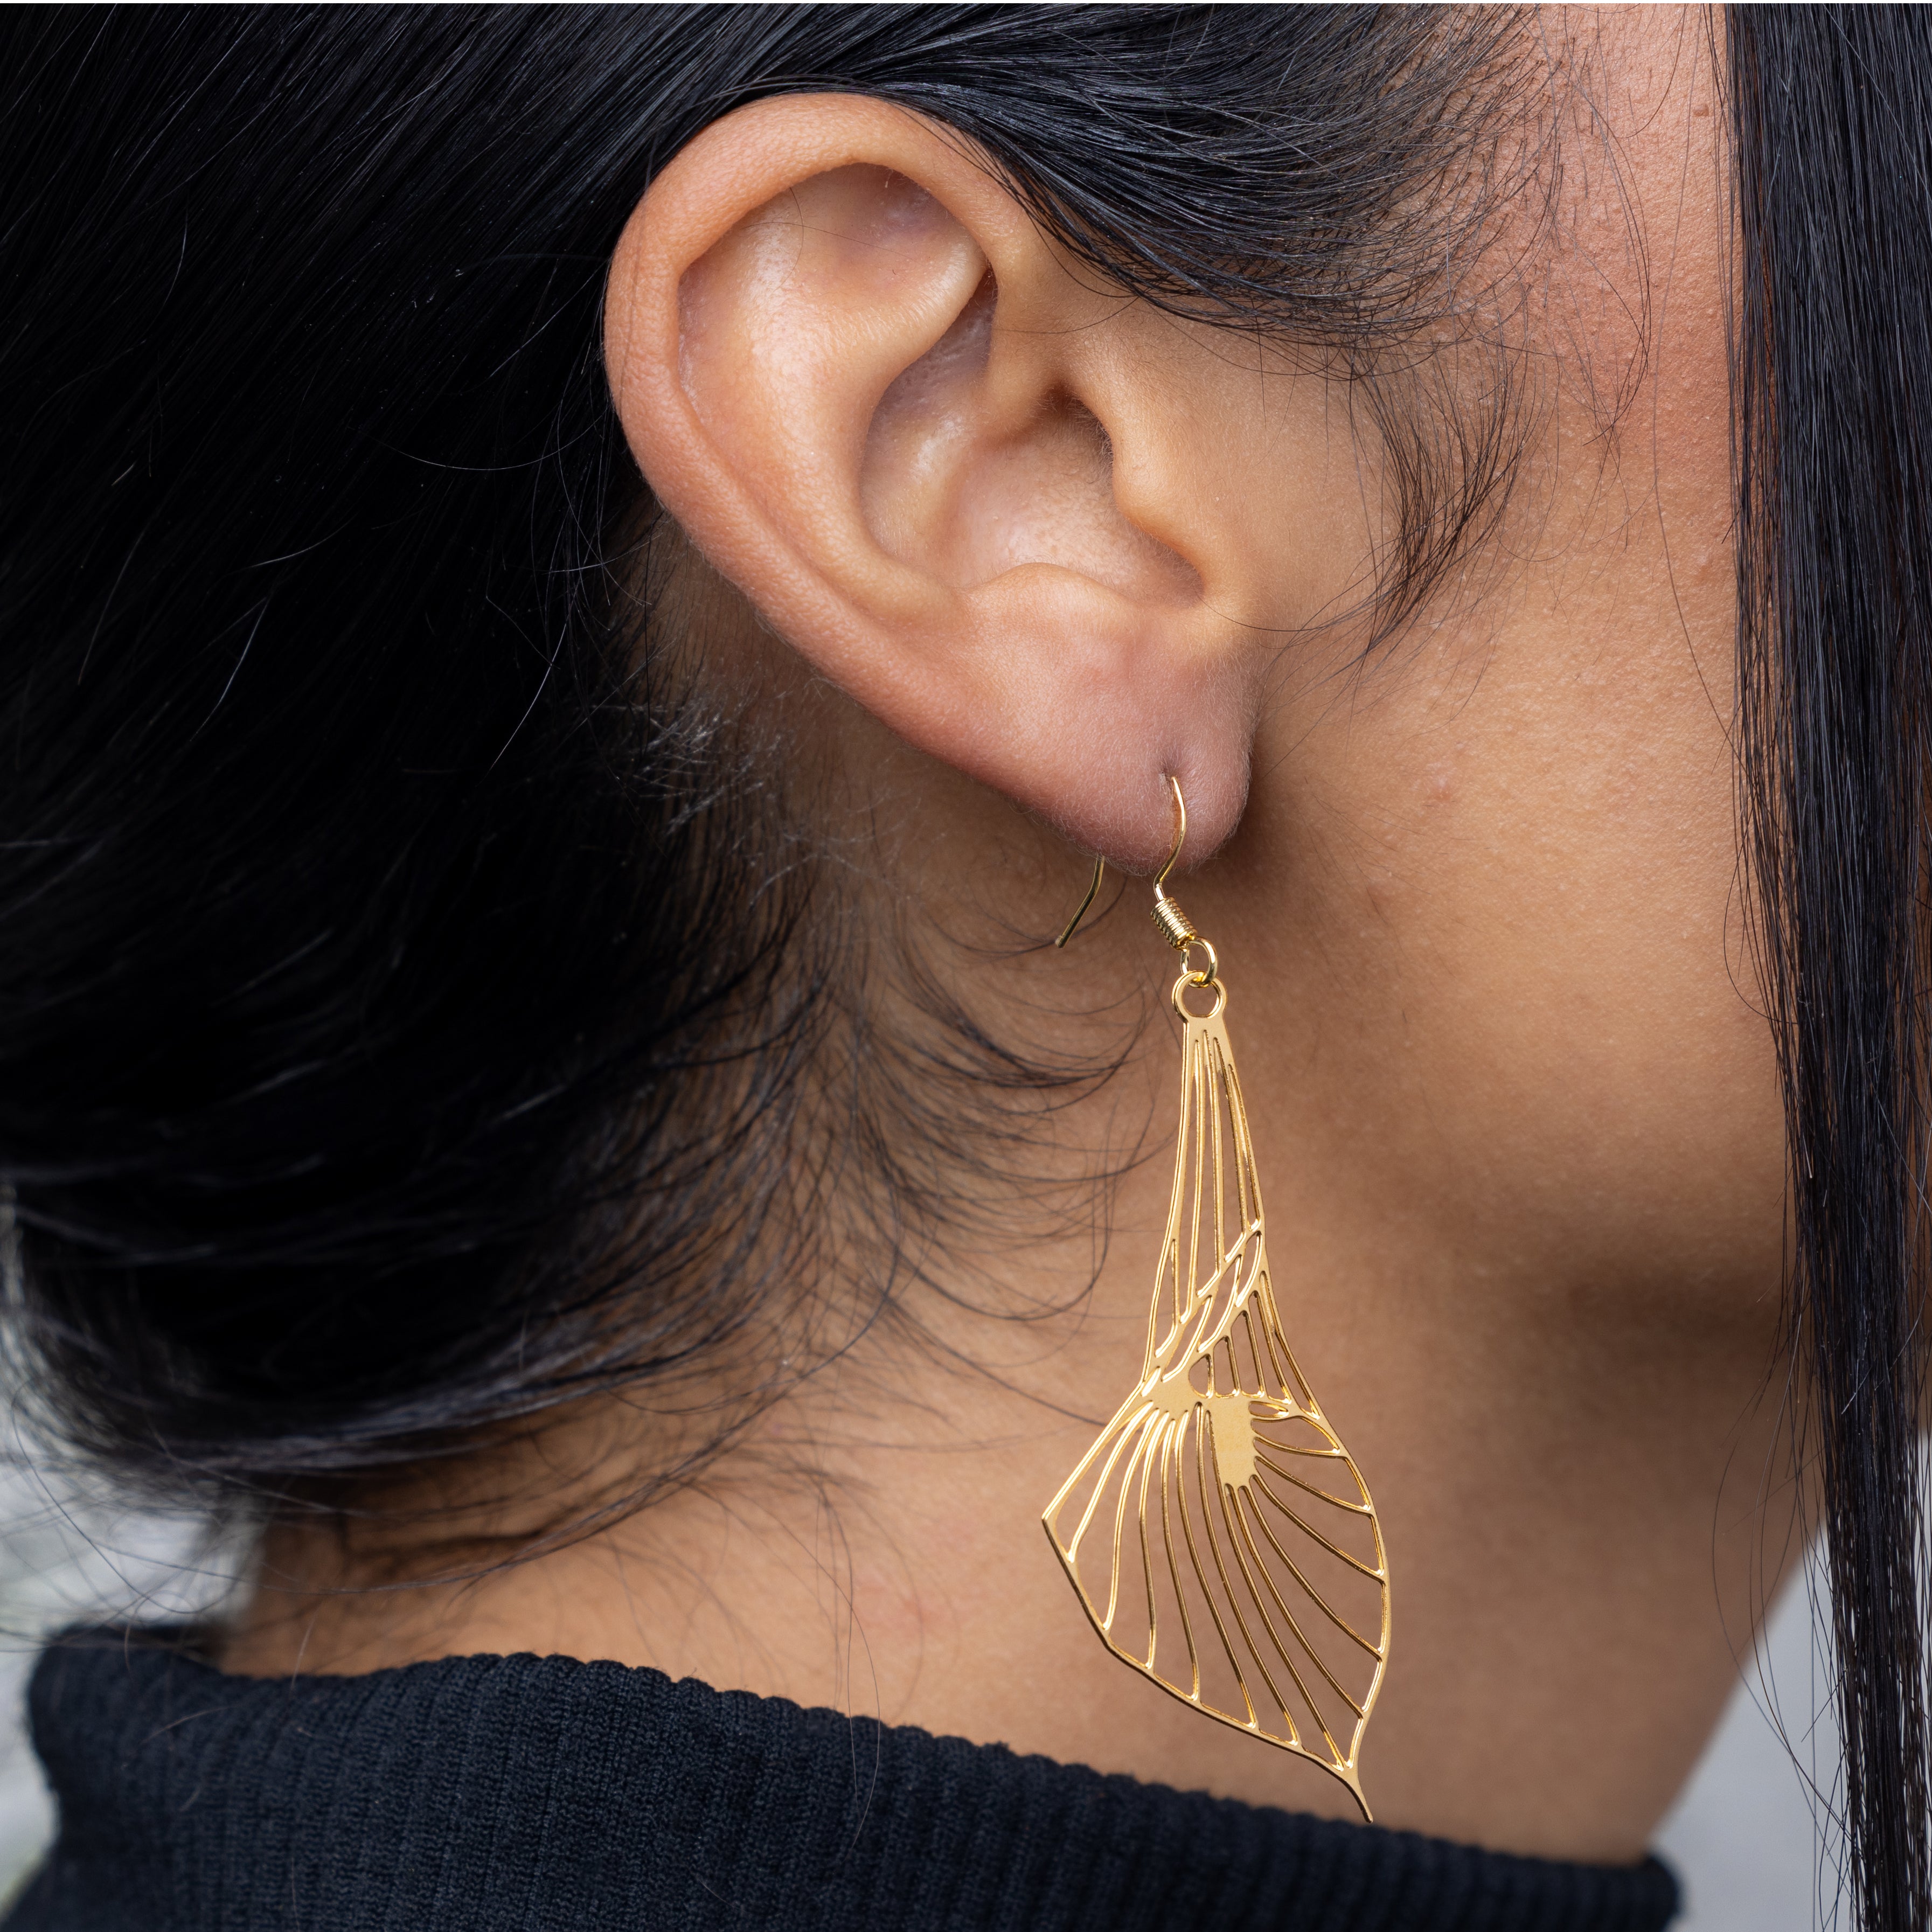 calla lily earrings | Nature inspired jewelry for women